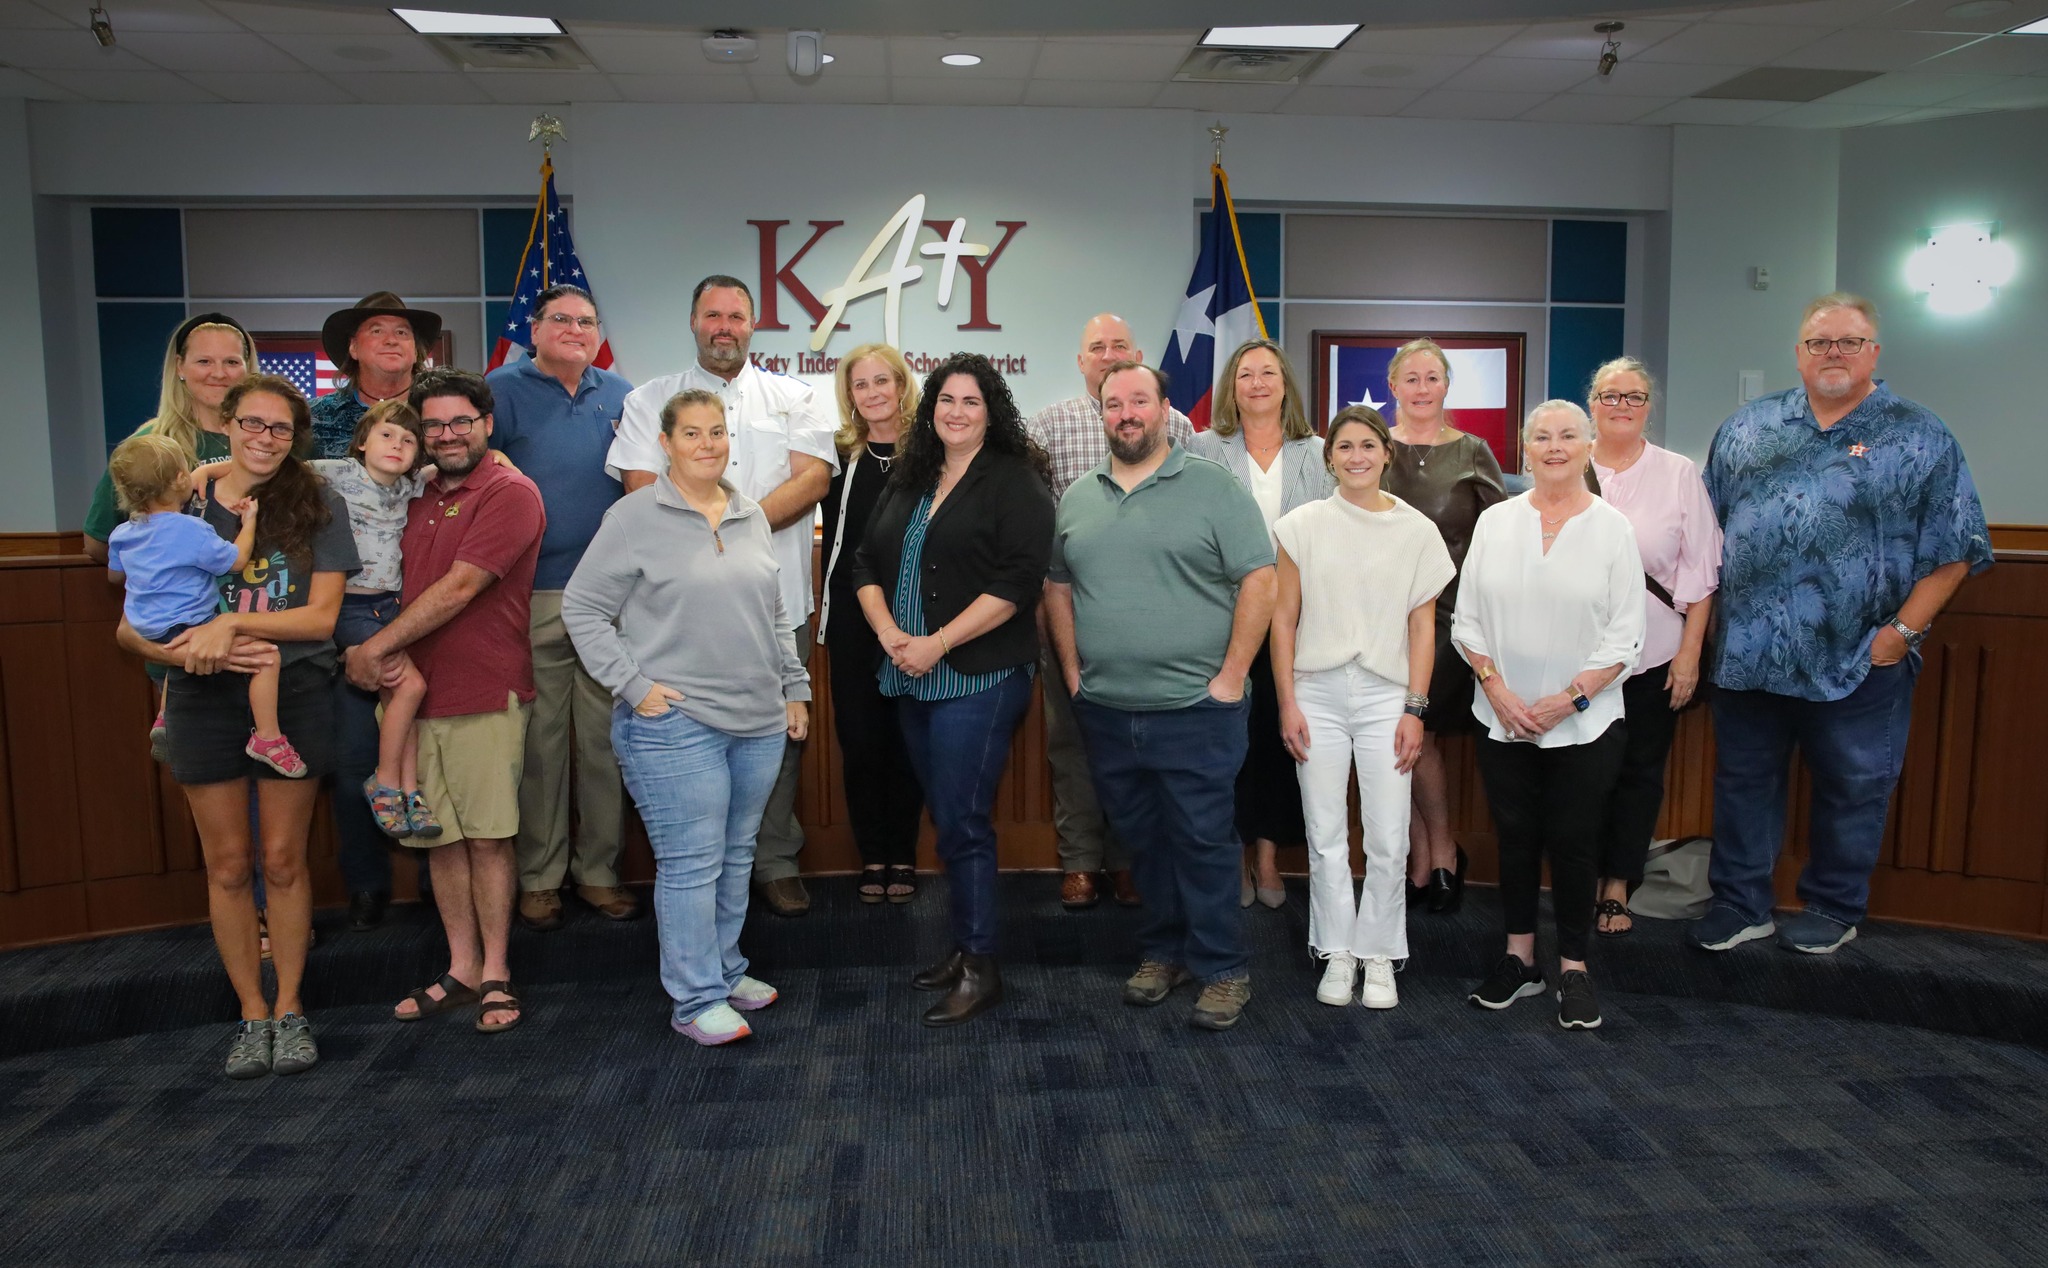 Katy ISD Board Approves Naming of High School #10 